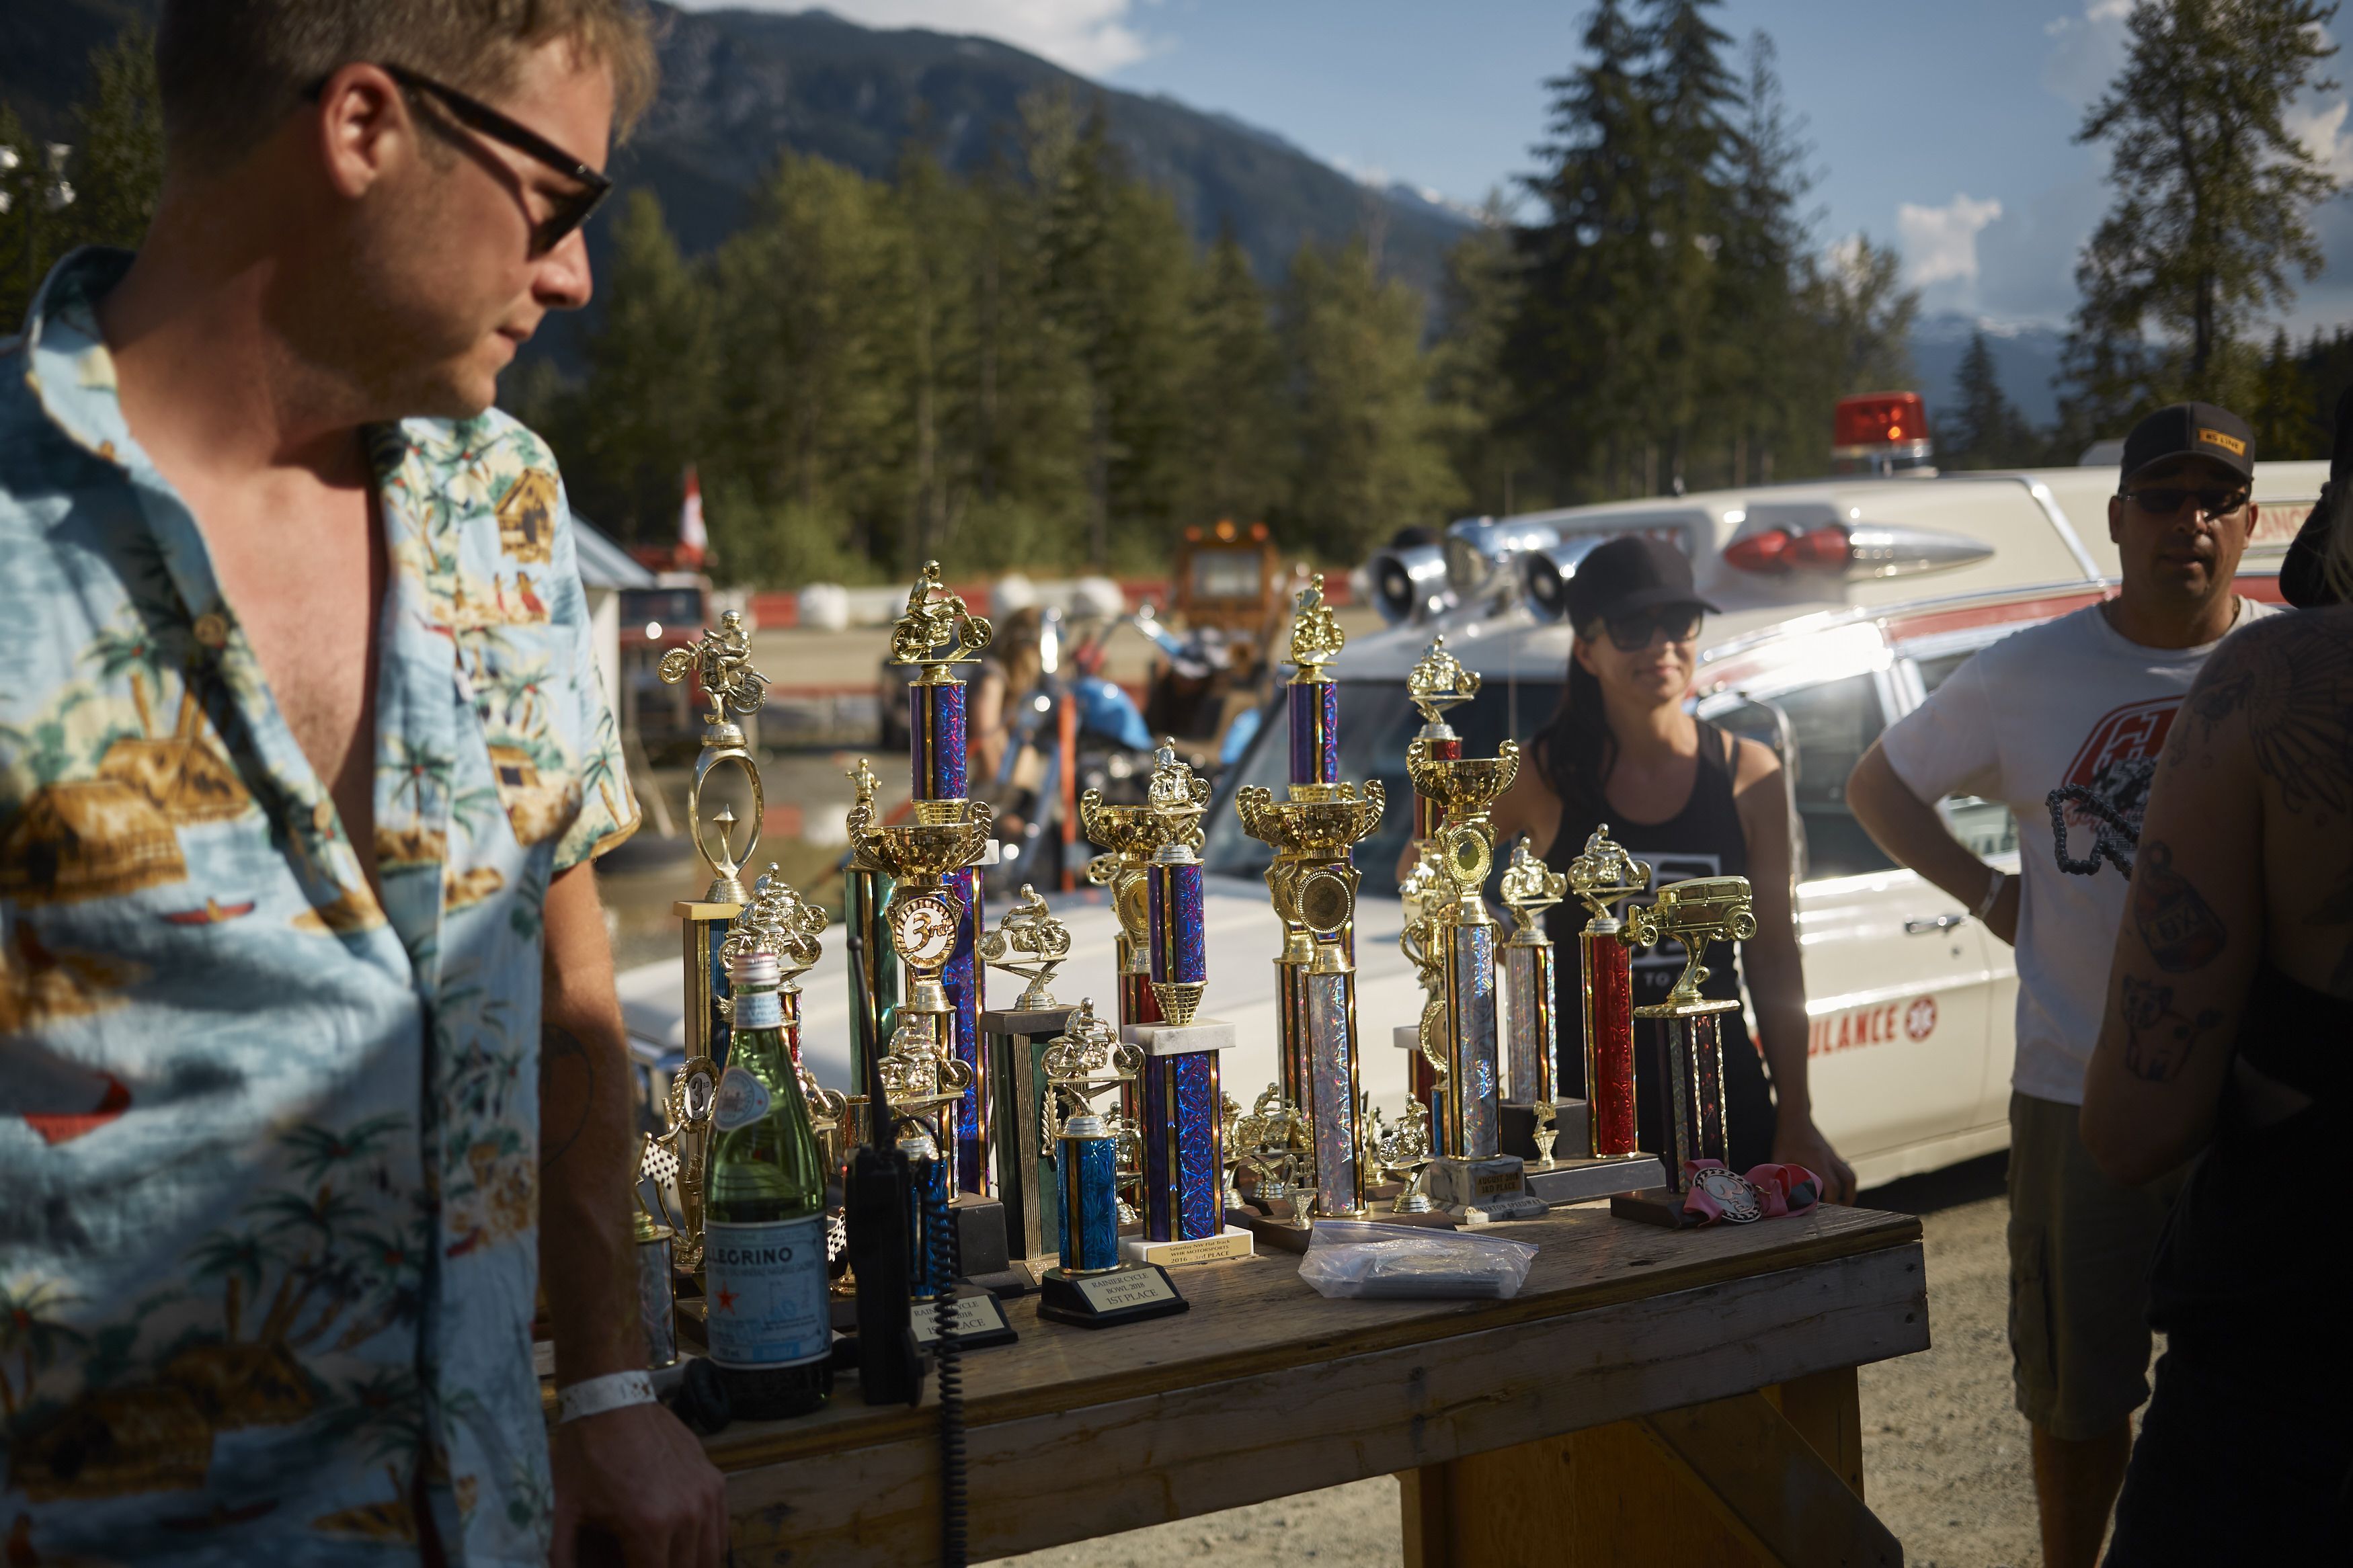 Plenty of trophies to be won. From pro classes to fun races. I myself won 3rd place in the Mad Dog Class.